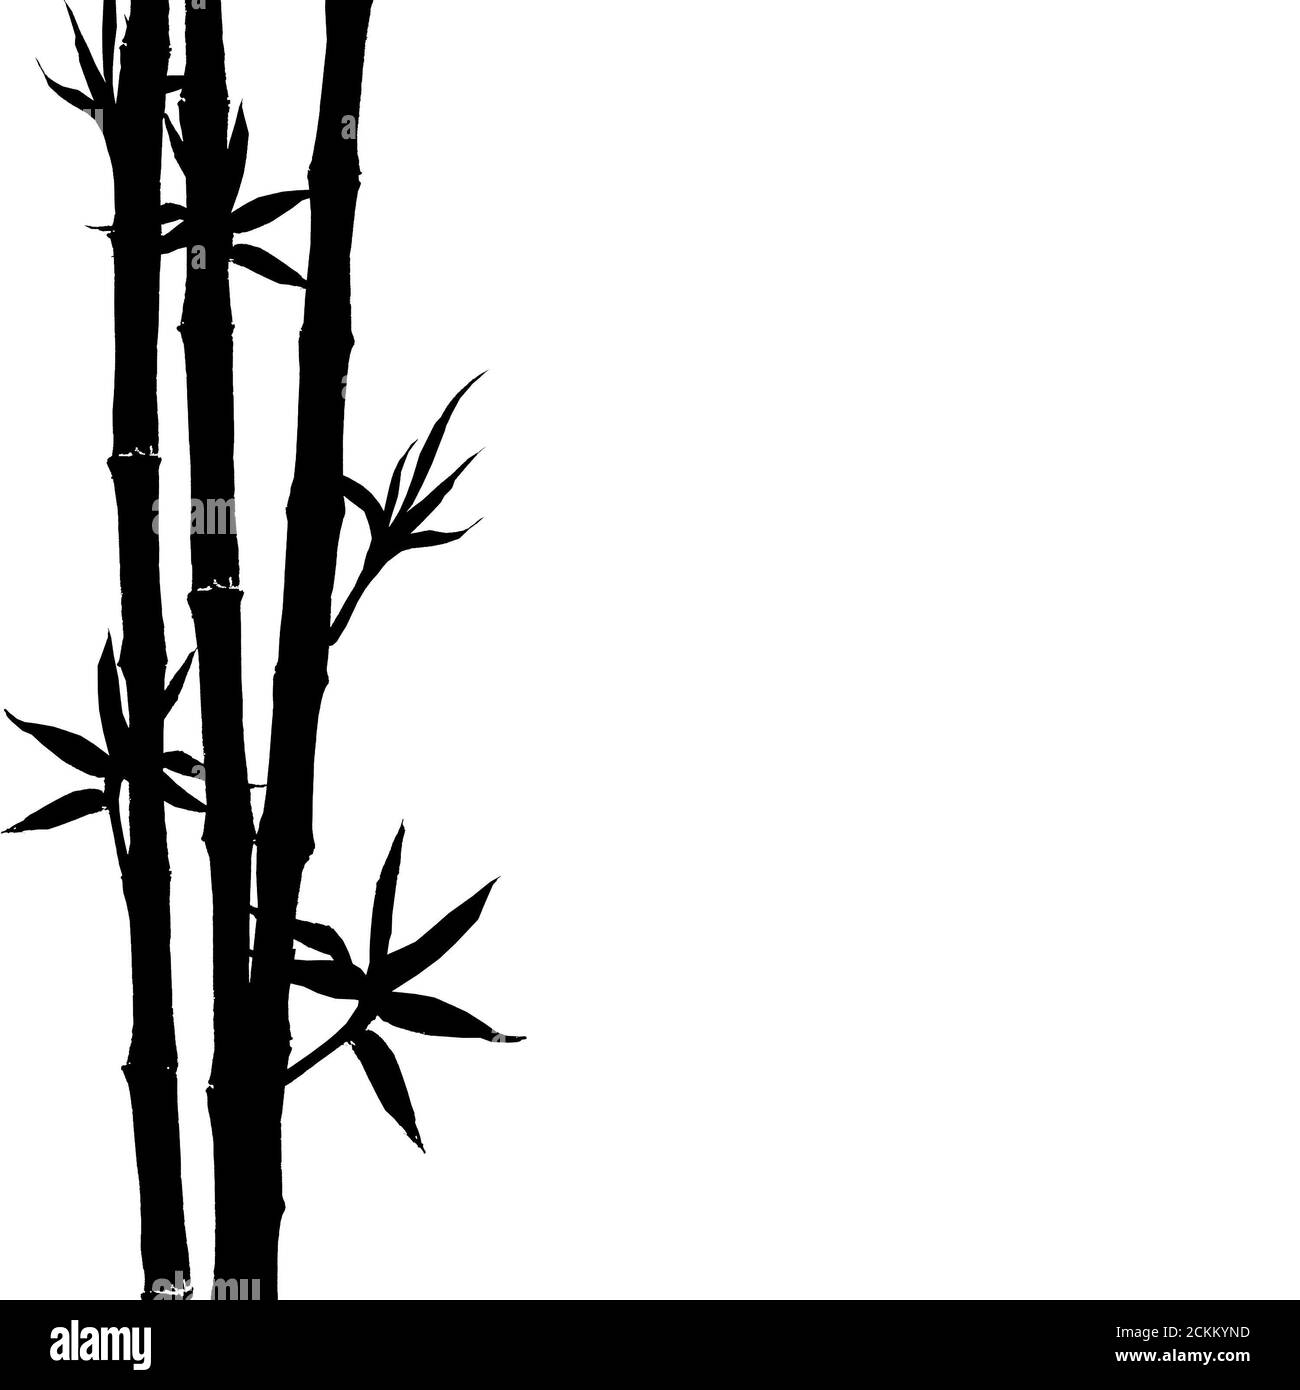 Black silhouette of bamboo stems and leaves isolated on white background. Hand drawn botanical illustration with space for text. Stock Photo